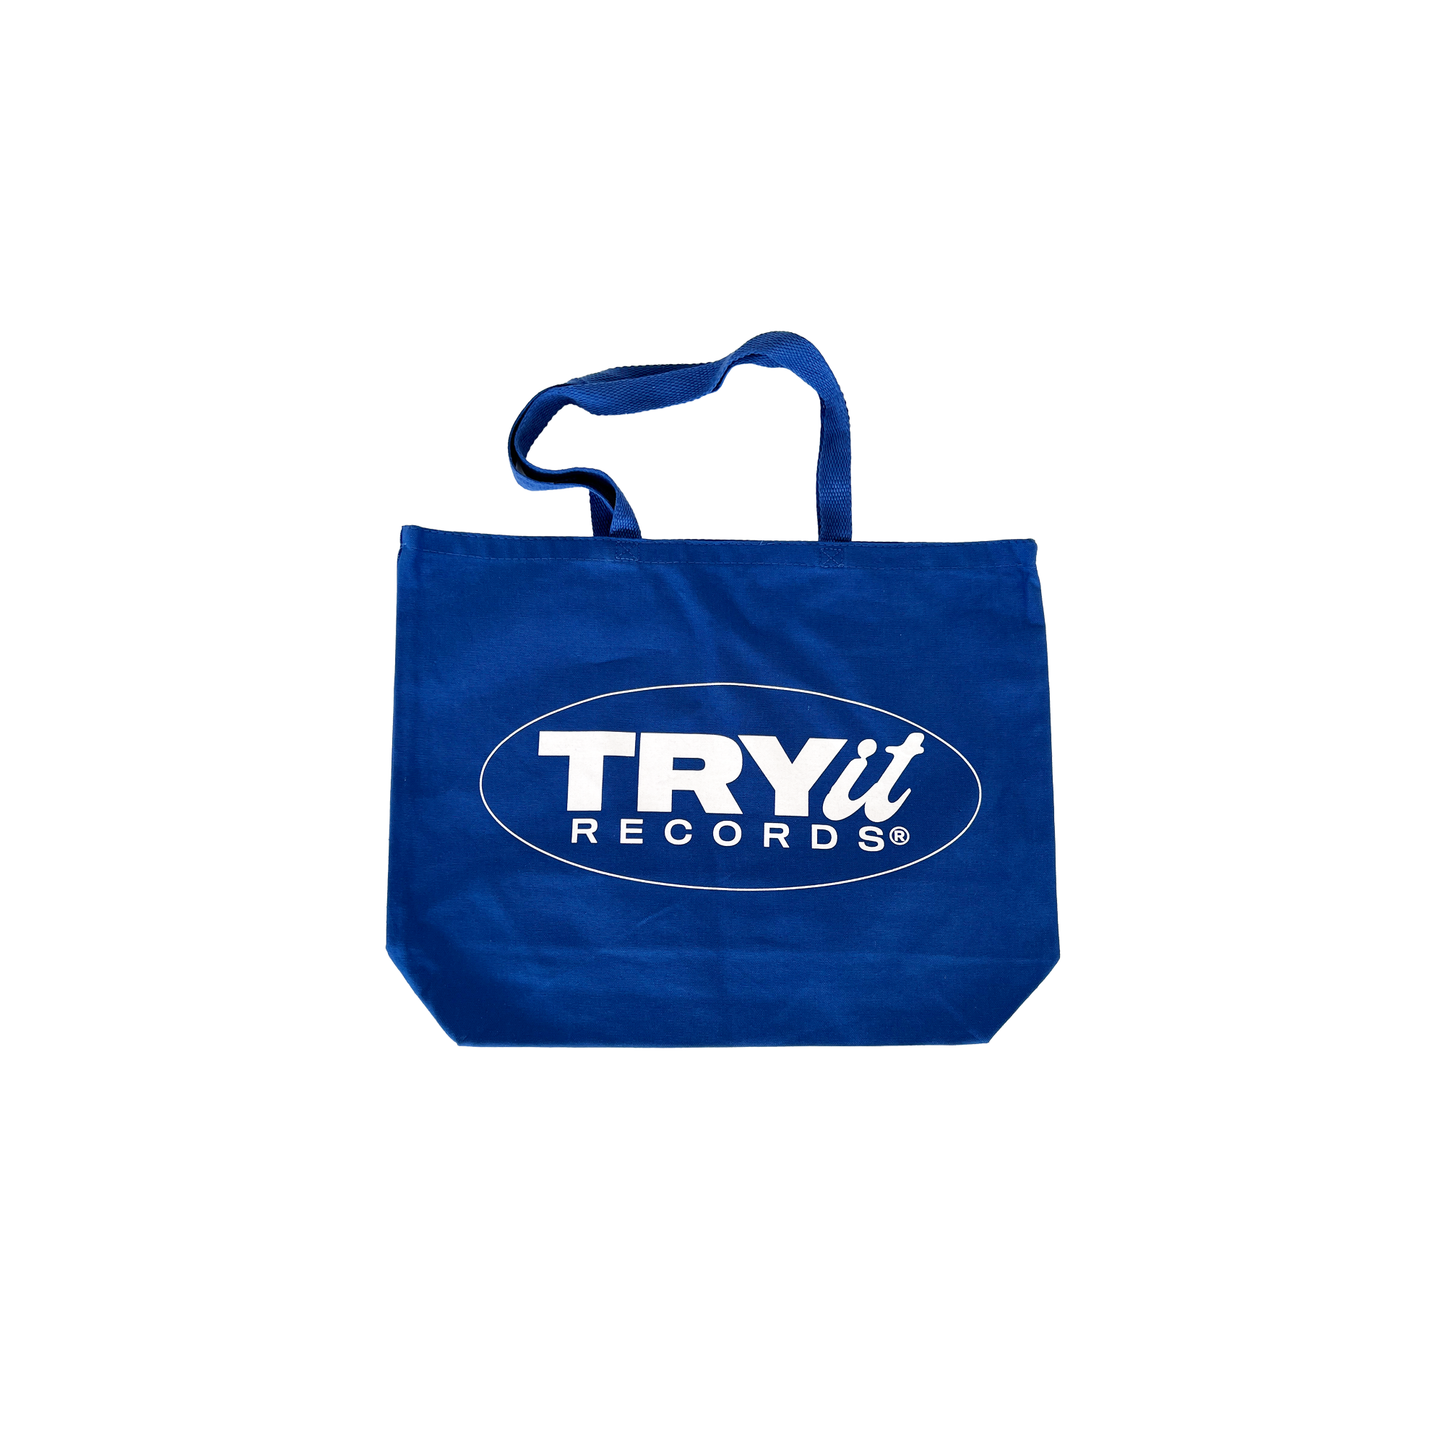 Try it Records Tote